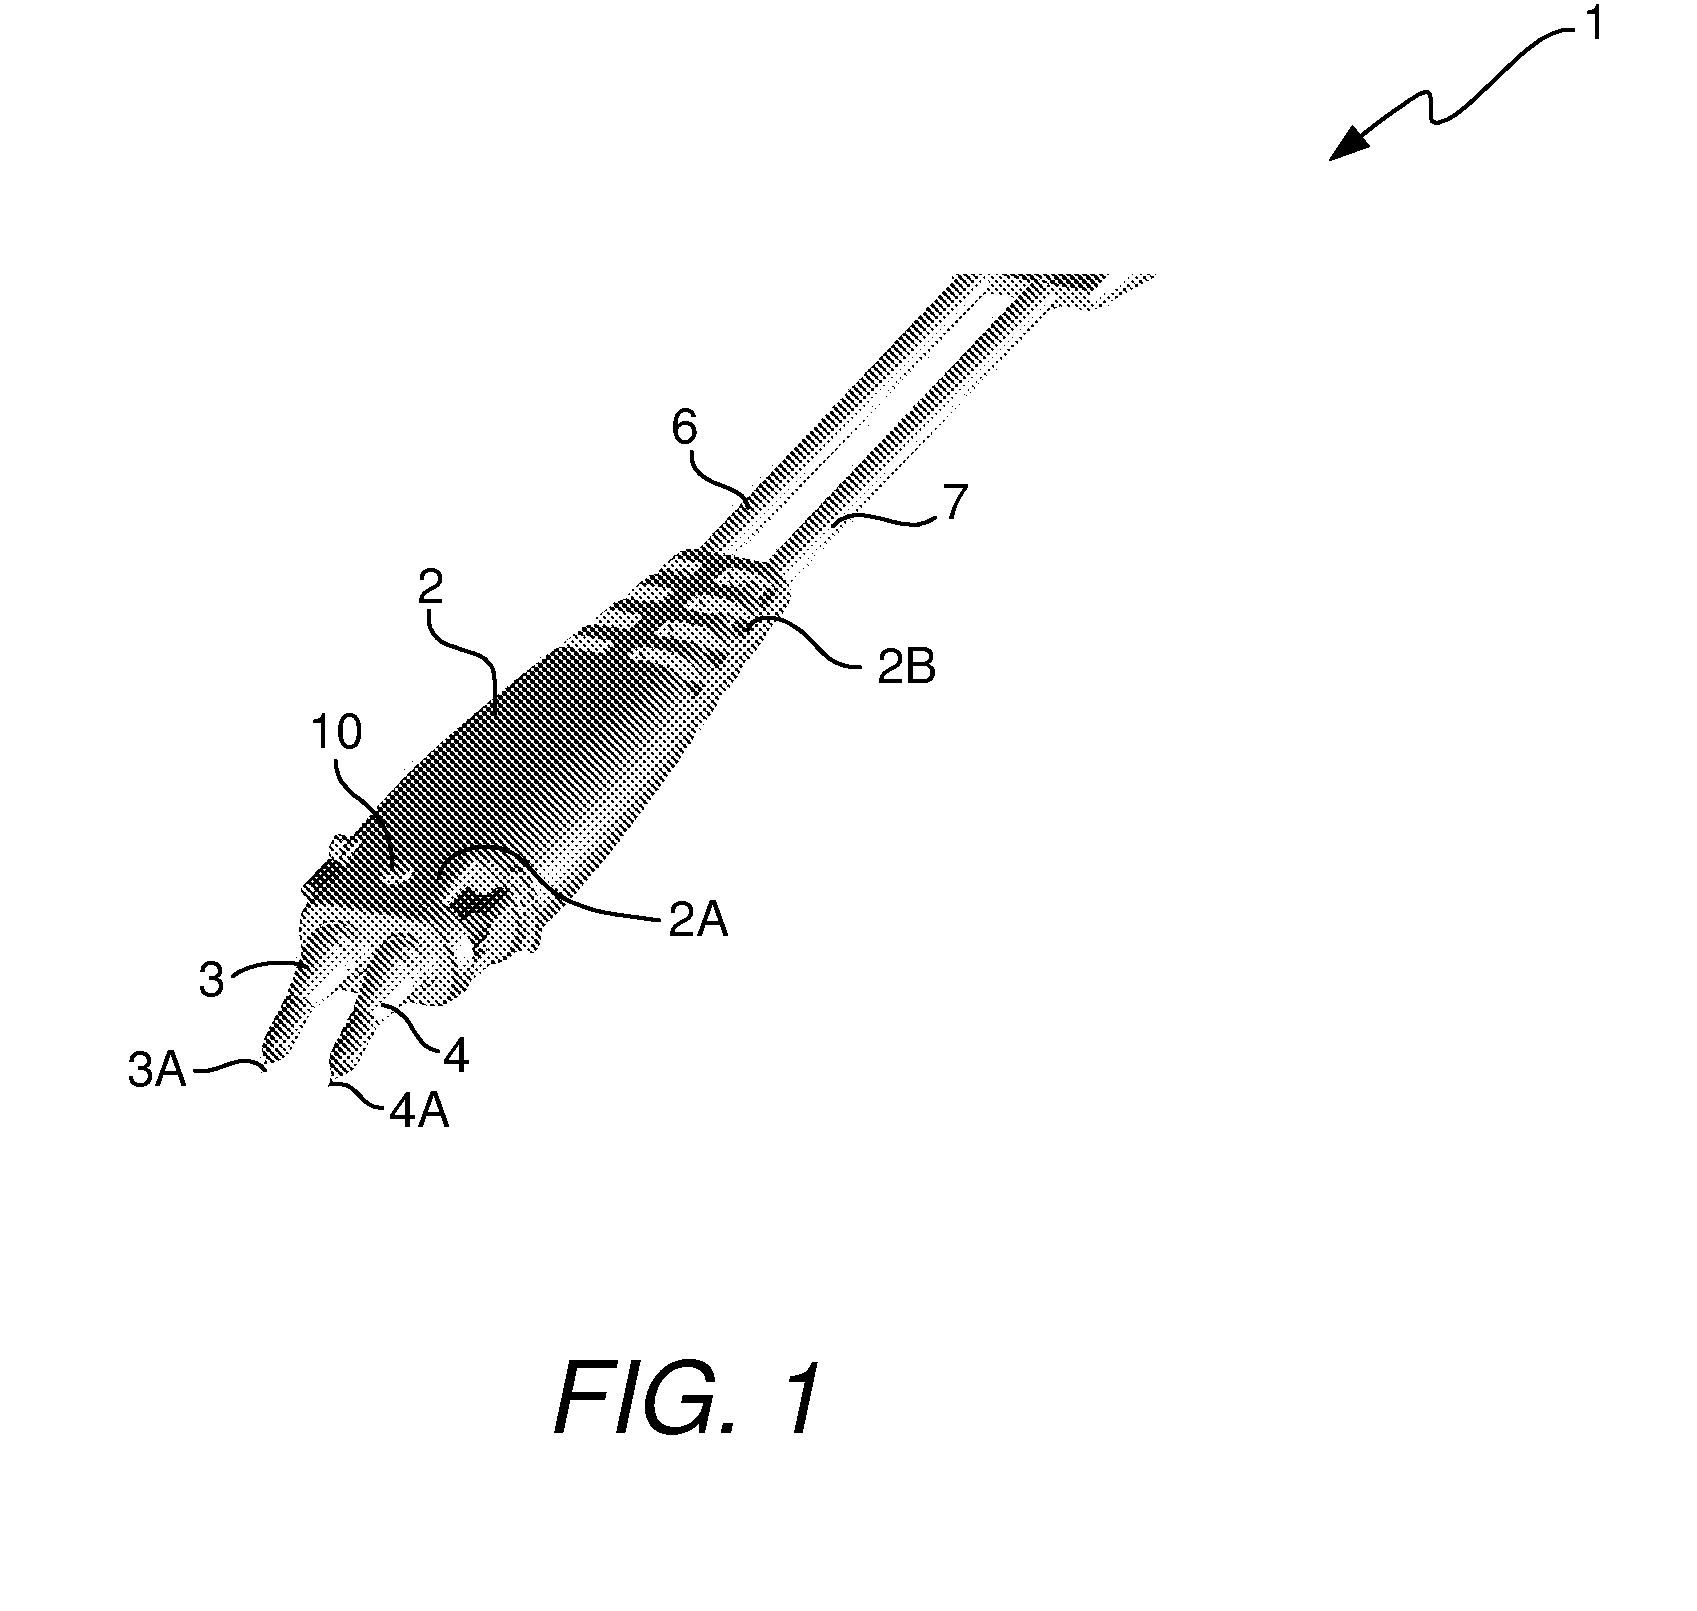 Probe device having a light source thereon